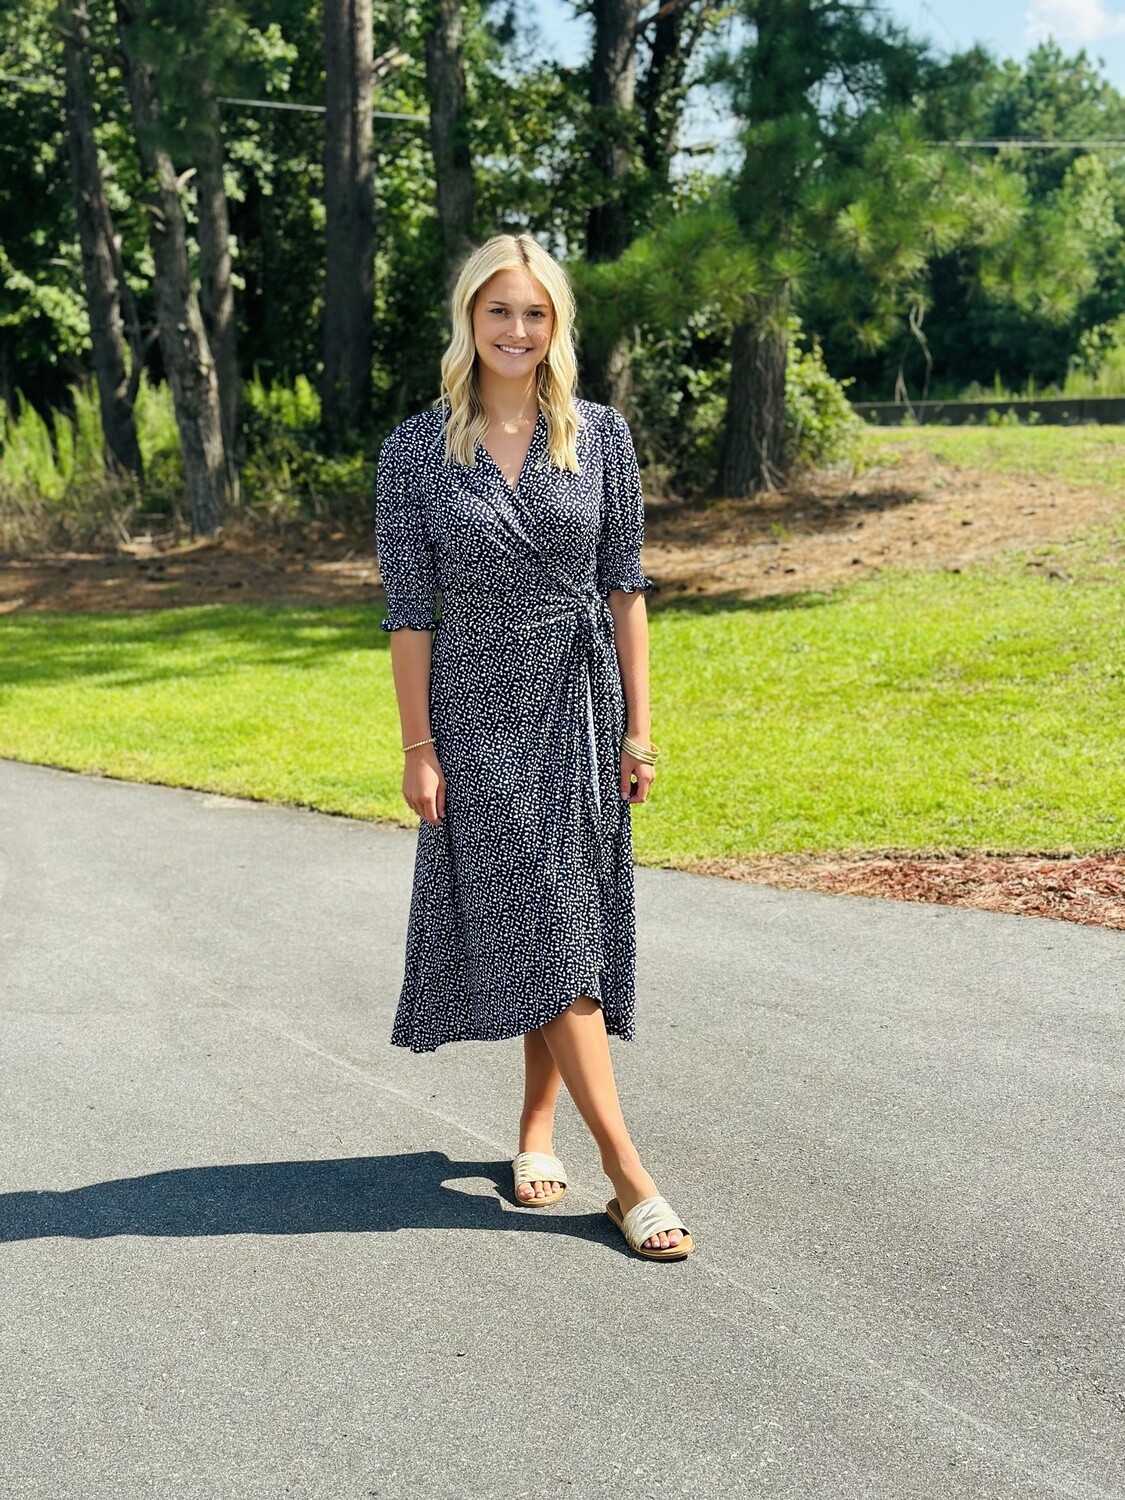 Marble Fashions Polka Dotted Wrap Dress